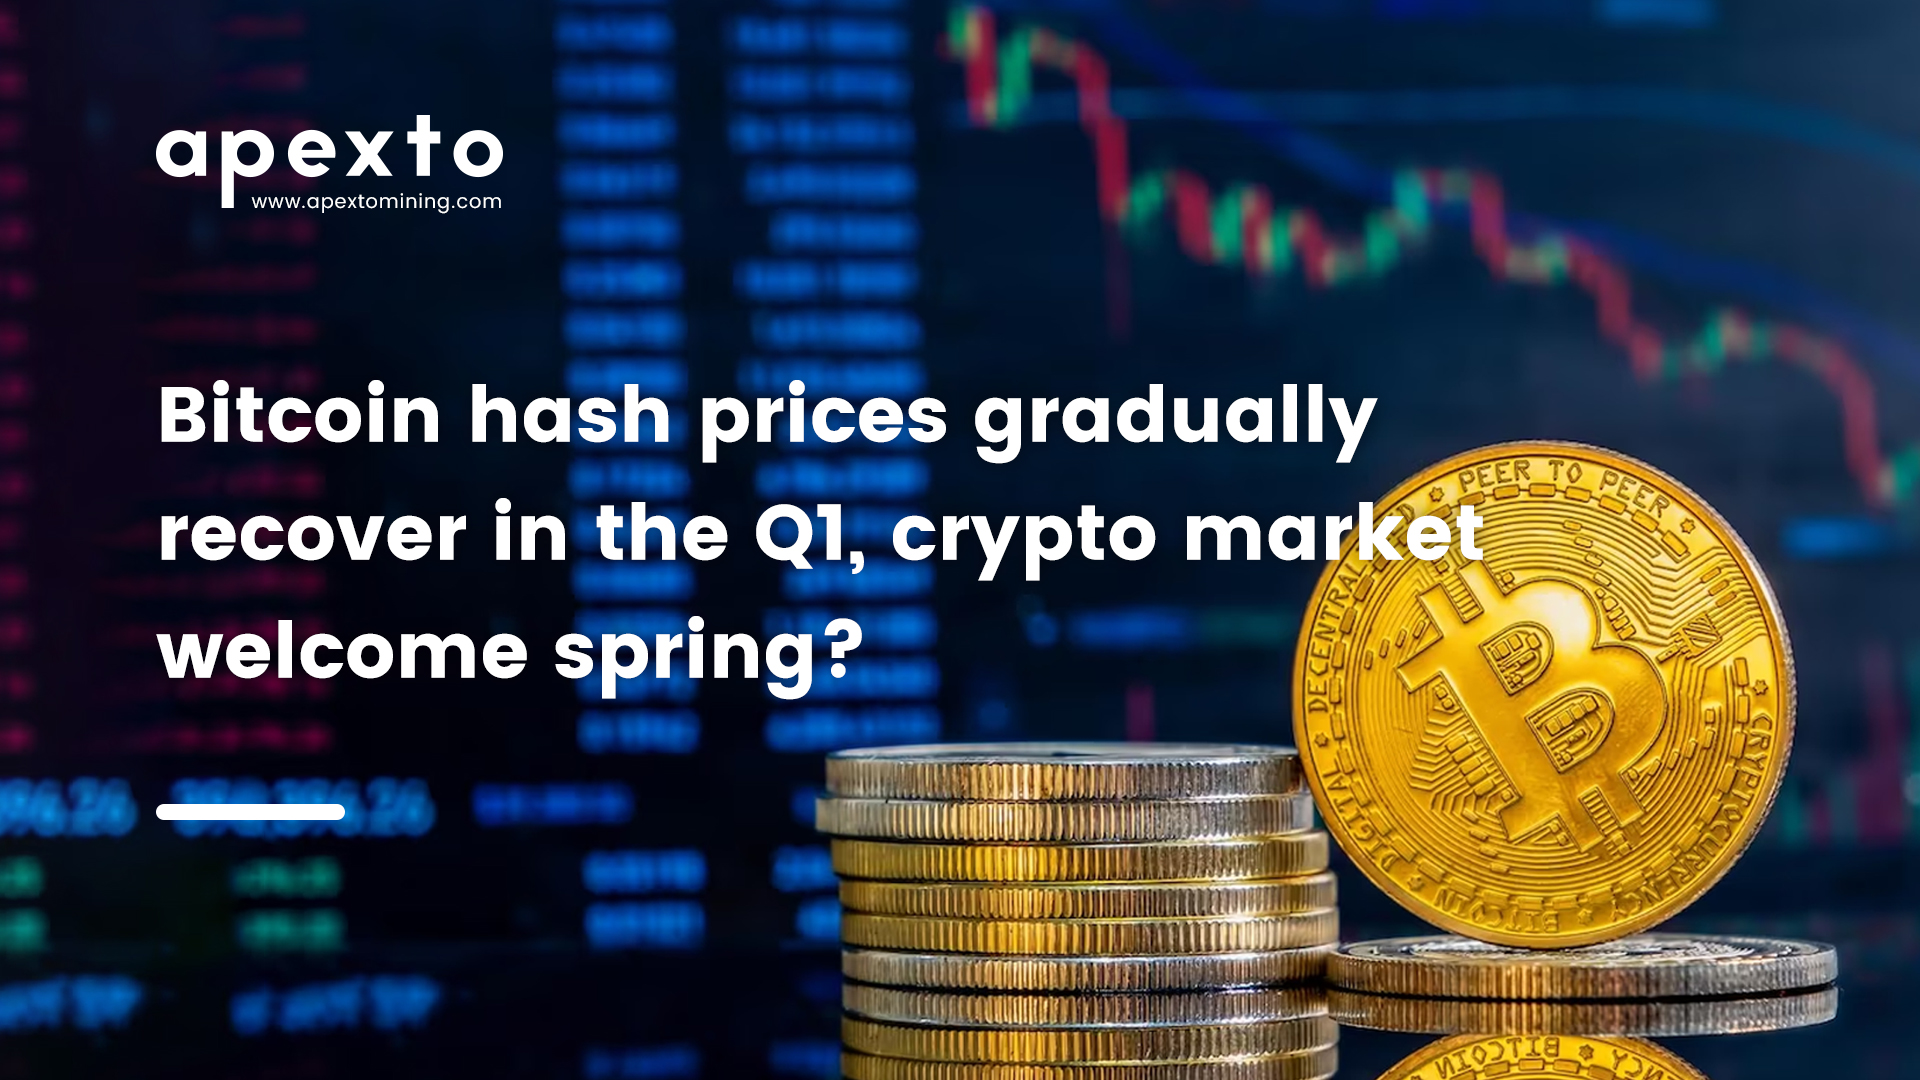 Market Research ：Bitcoin hash prices gradually recover in the Q1, crypto market welcome spring?